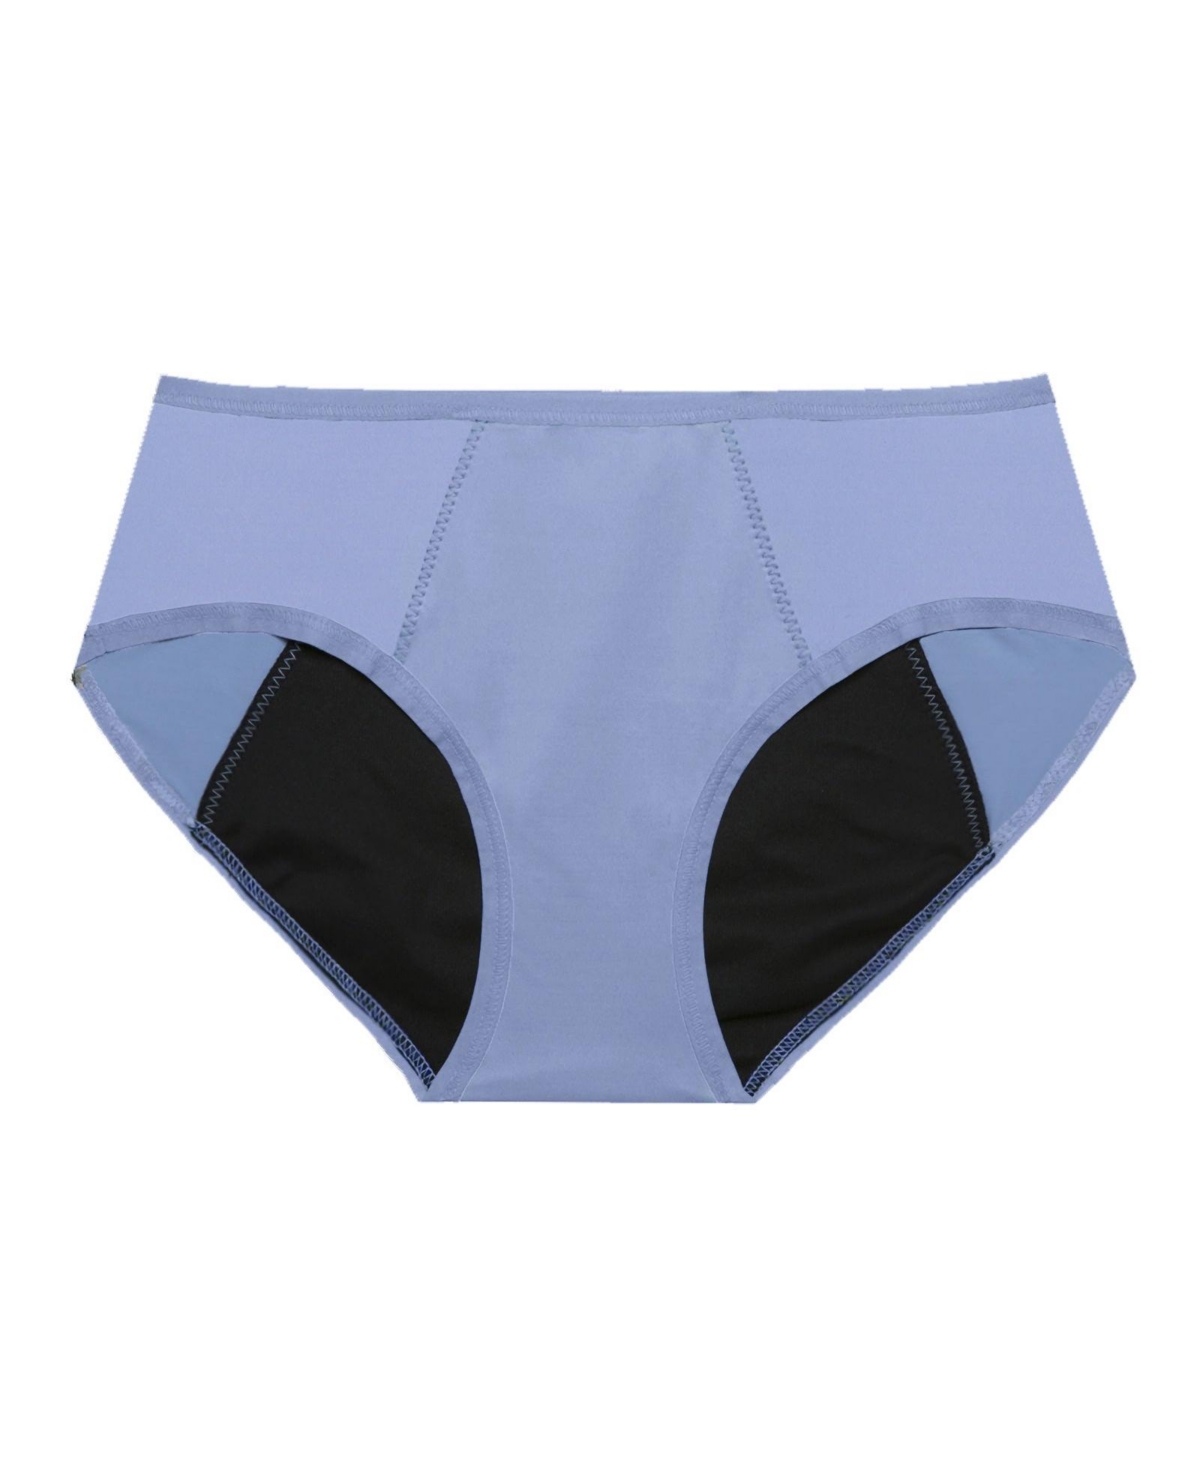 Women's Nellie Hipster Full Panty - Periwinkle